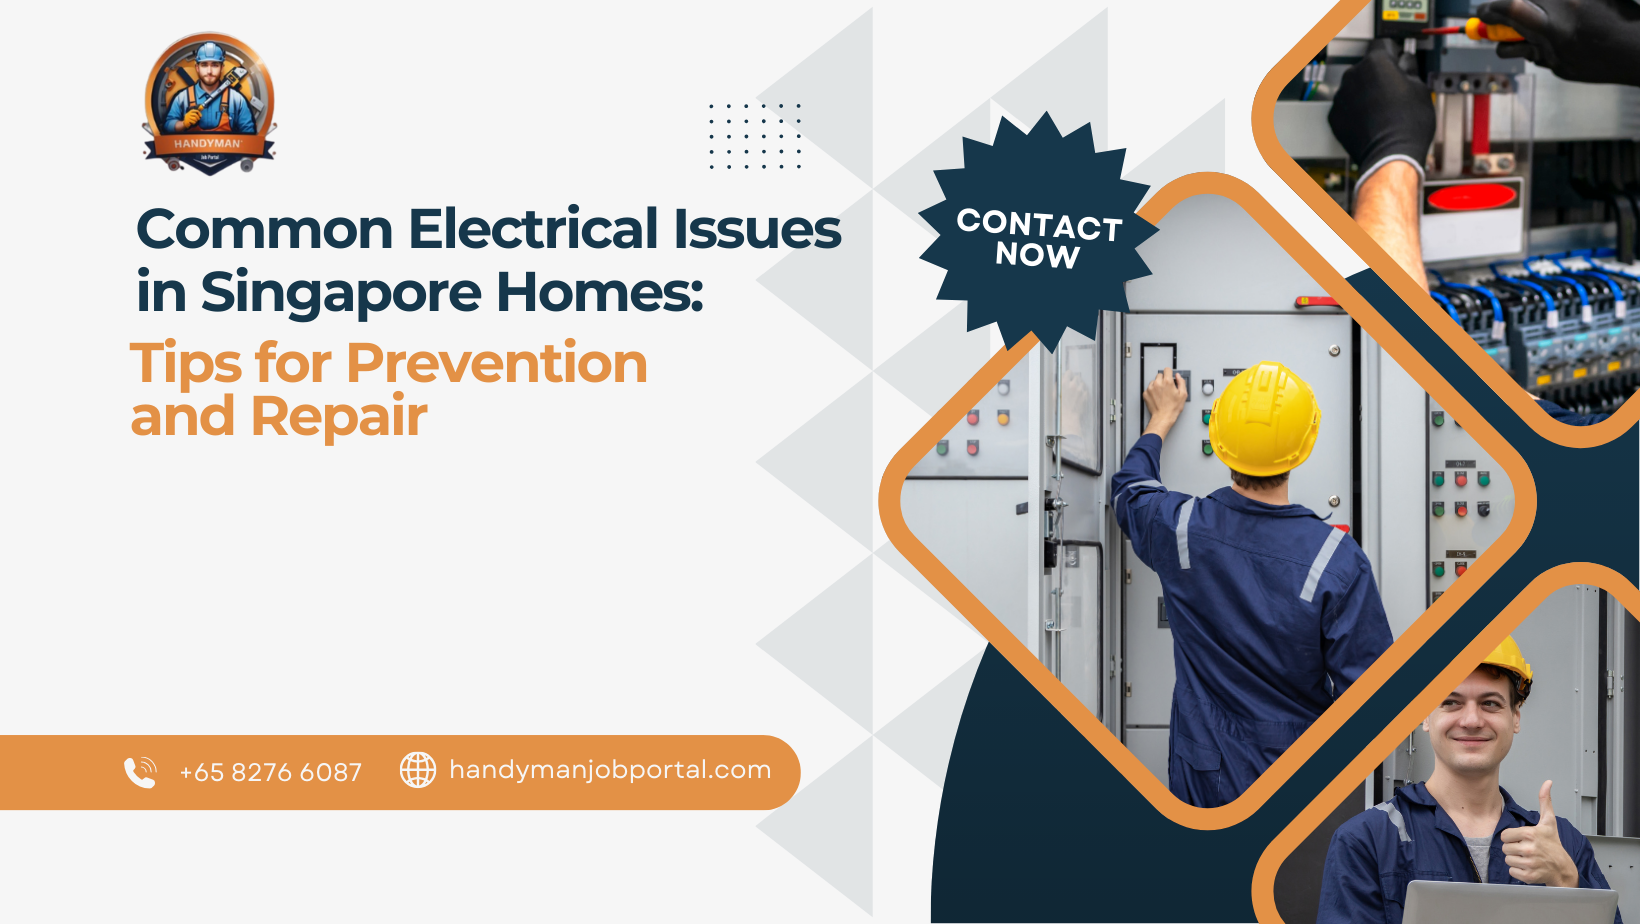 Common Electrical Issues in Singapore Homes: Tips for Prevention and Repair